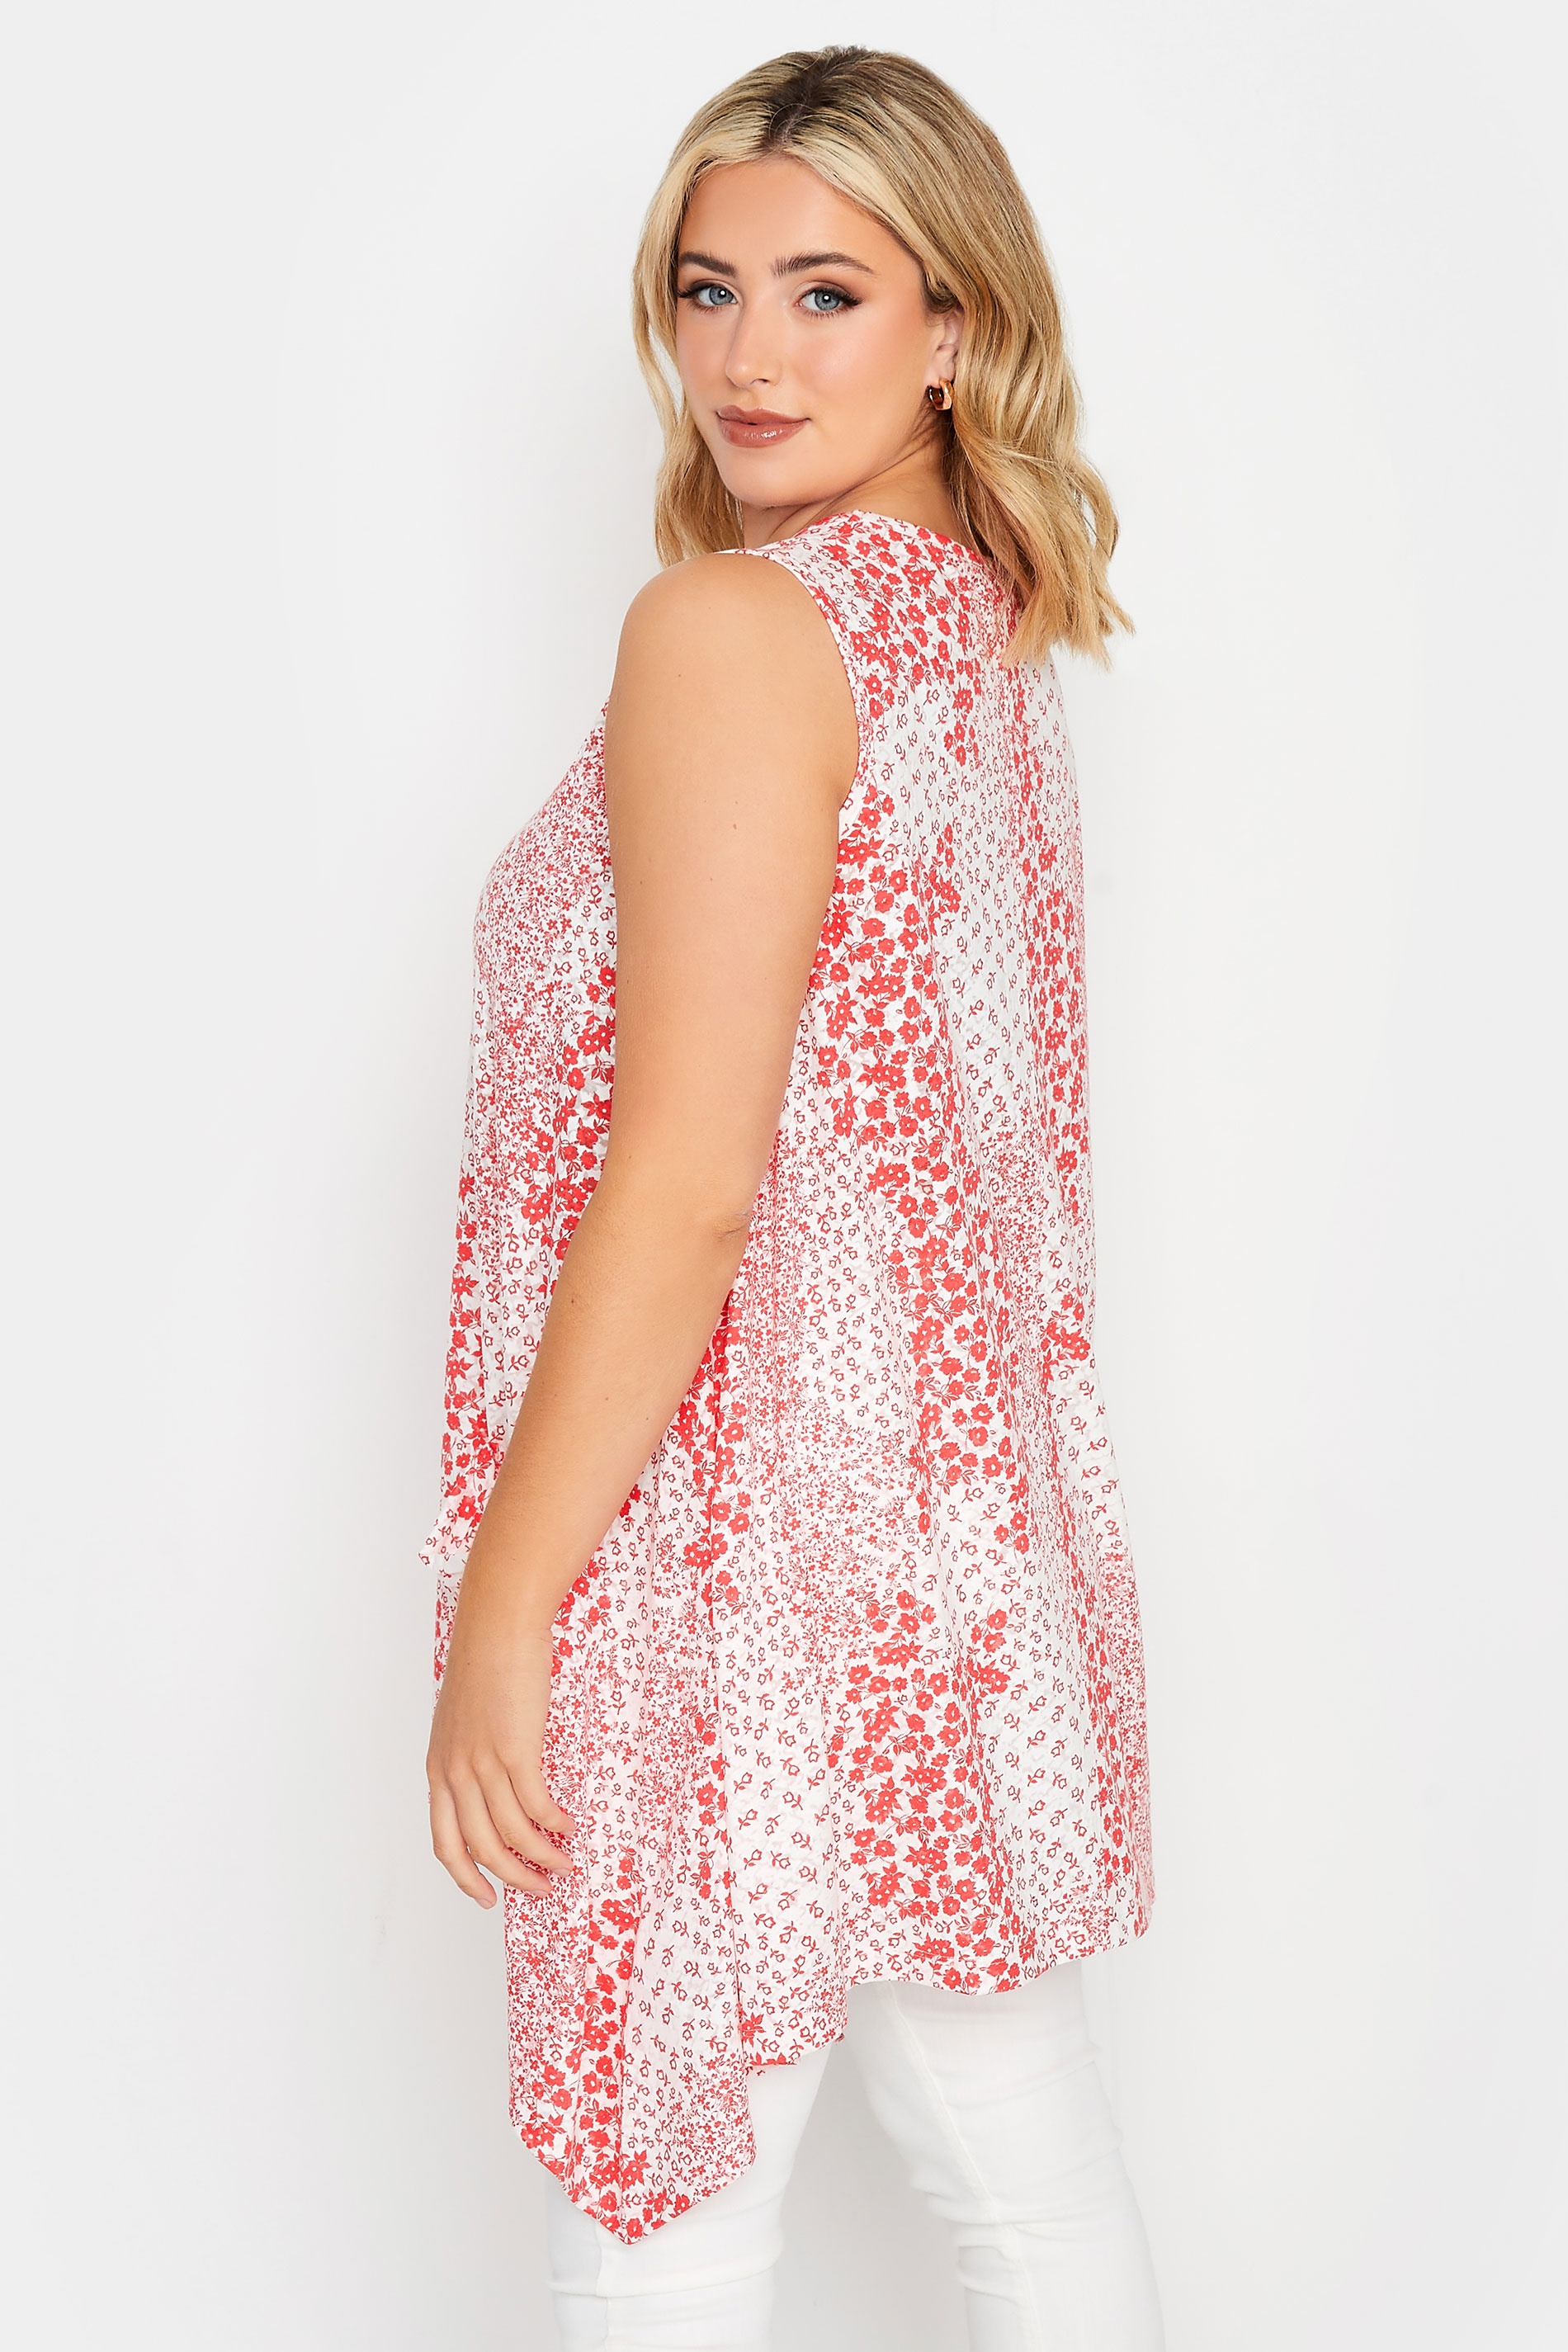 YOURS Curve Plus Size Red Ditsy Print Hanky Hem Vest Top | Yours Clothing 3